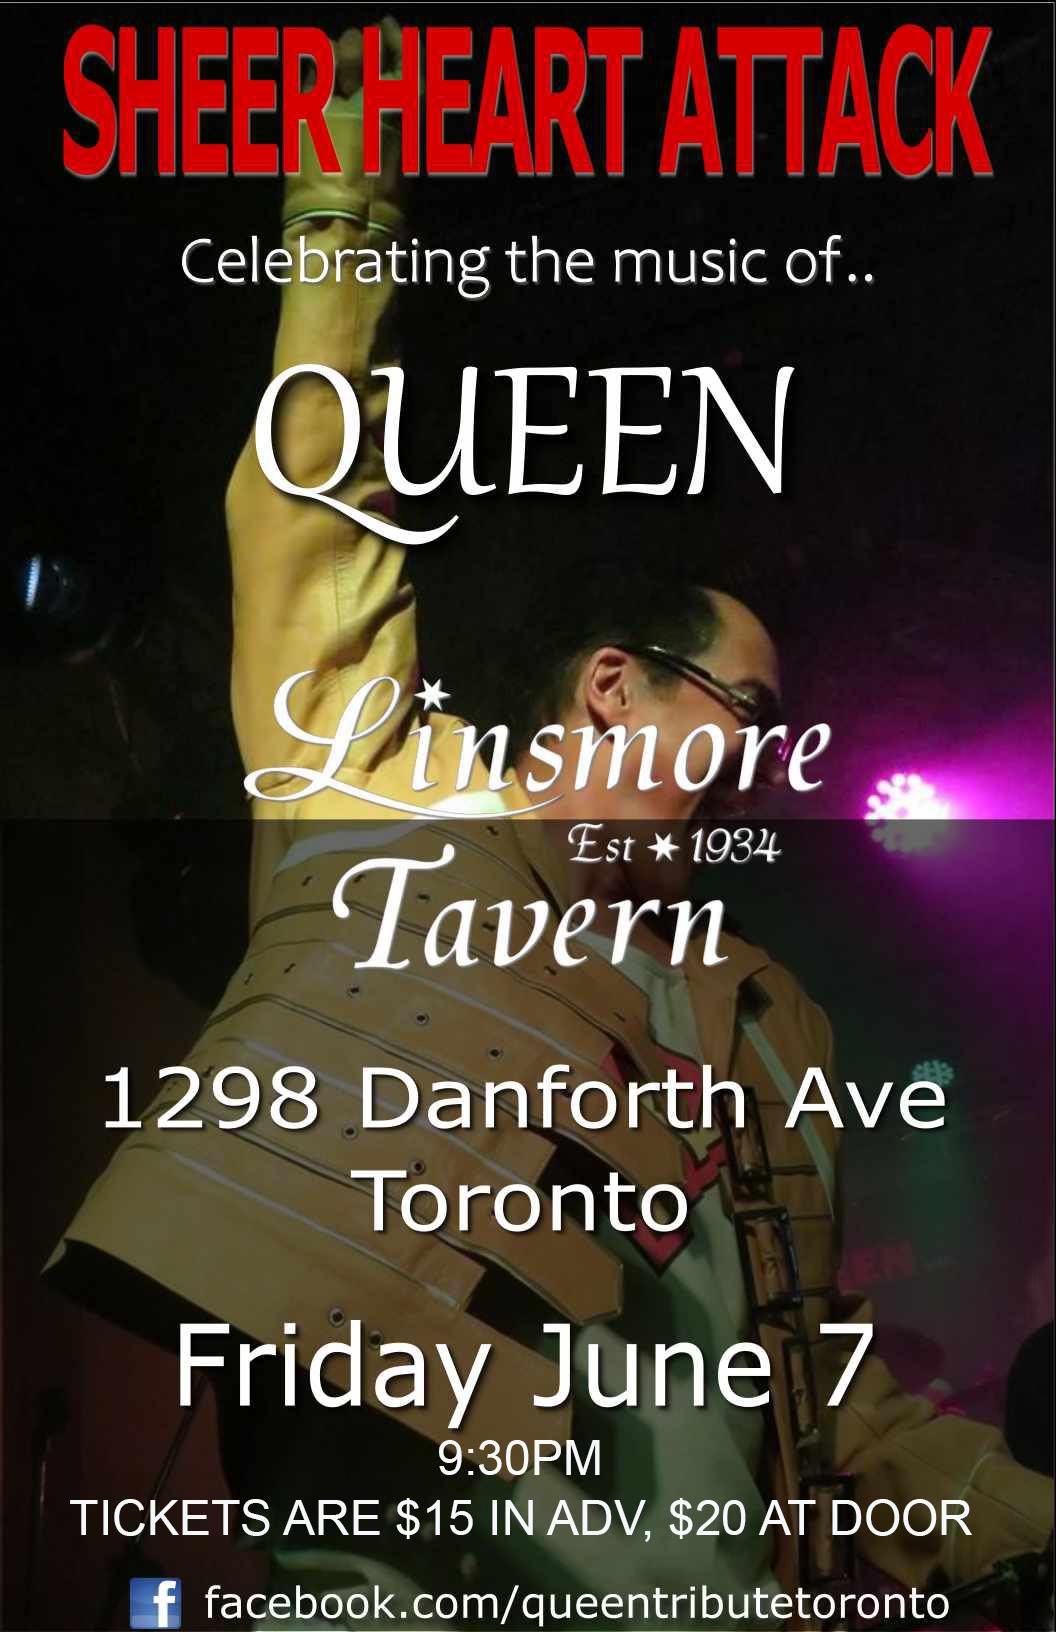 Sheer Heart Attack \u2013 celebrating the music of QUEEN Returns to the Linsmore Tavern!